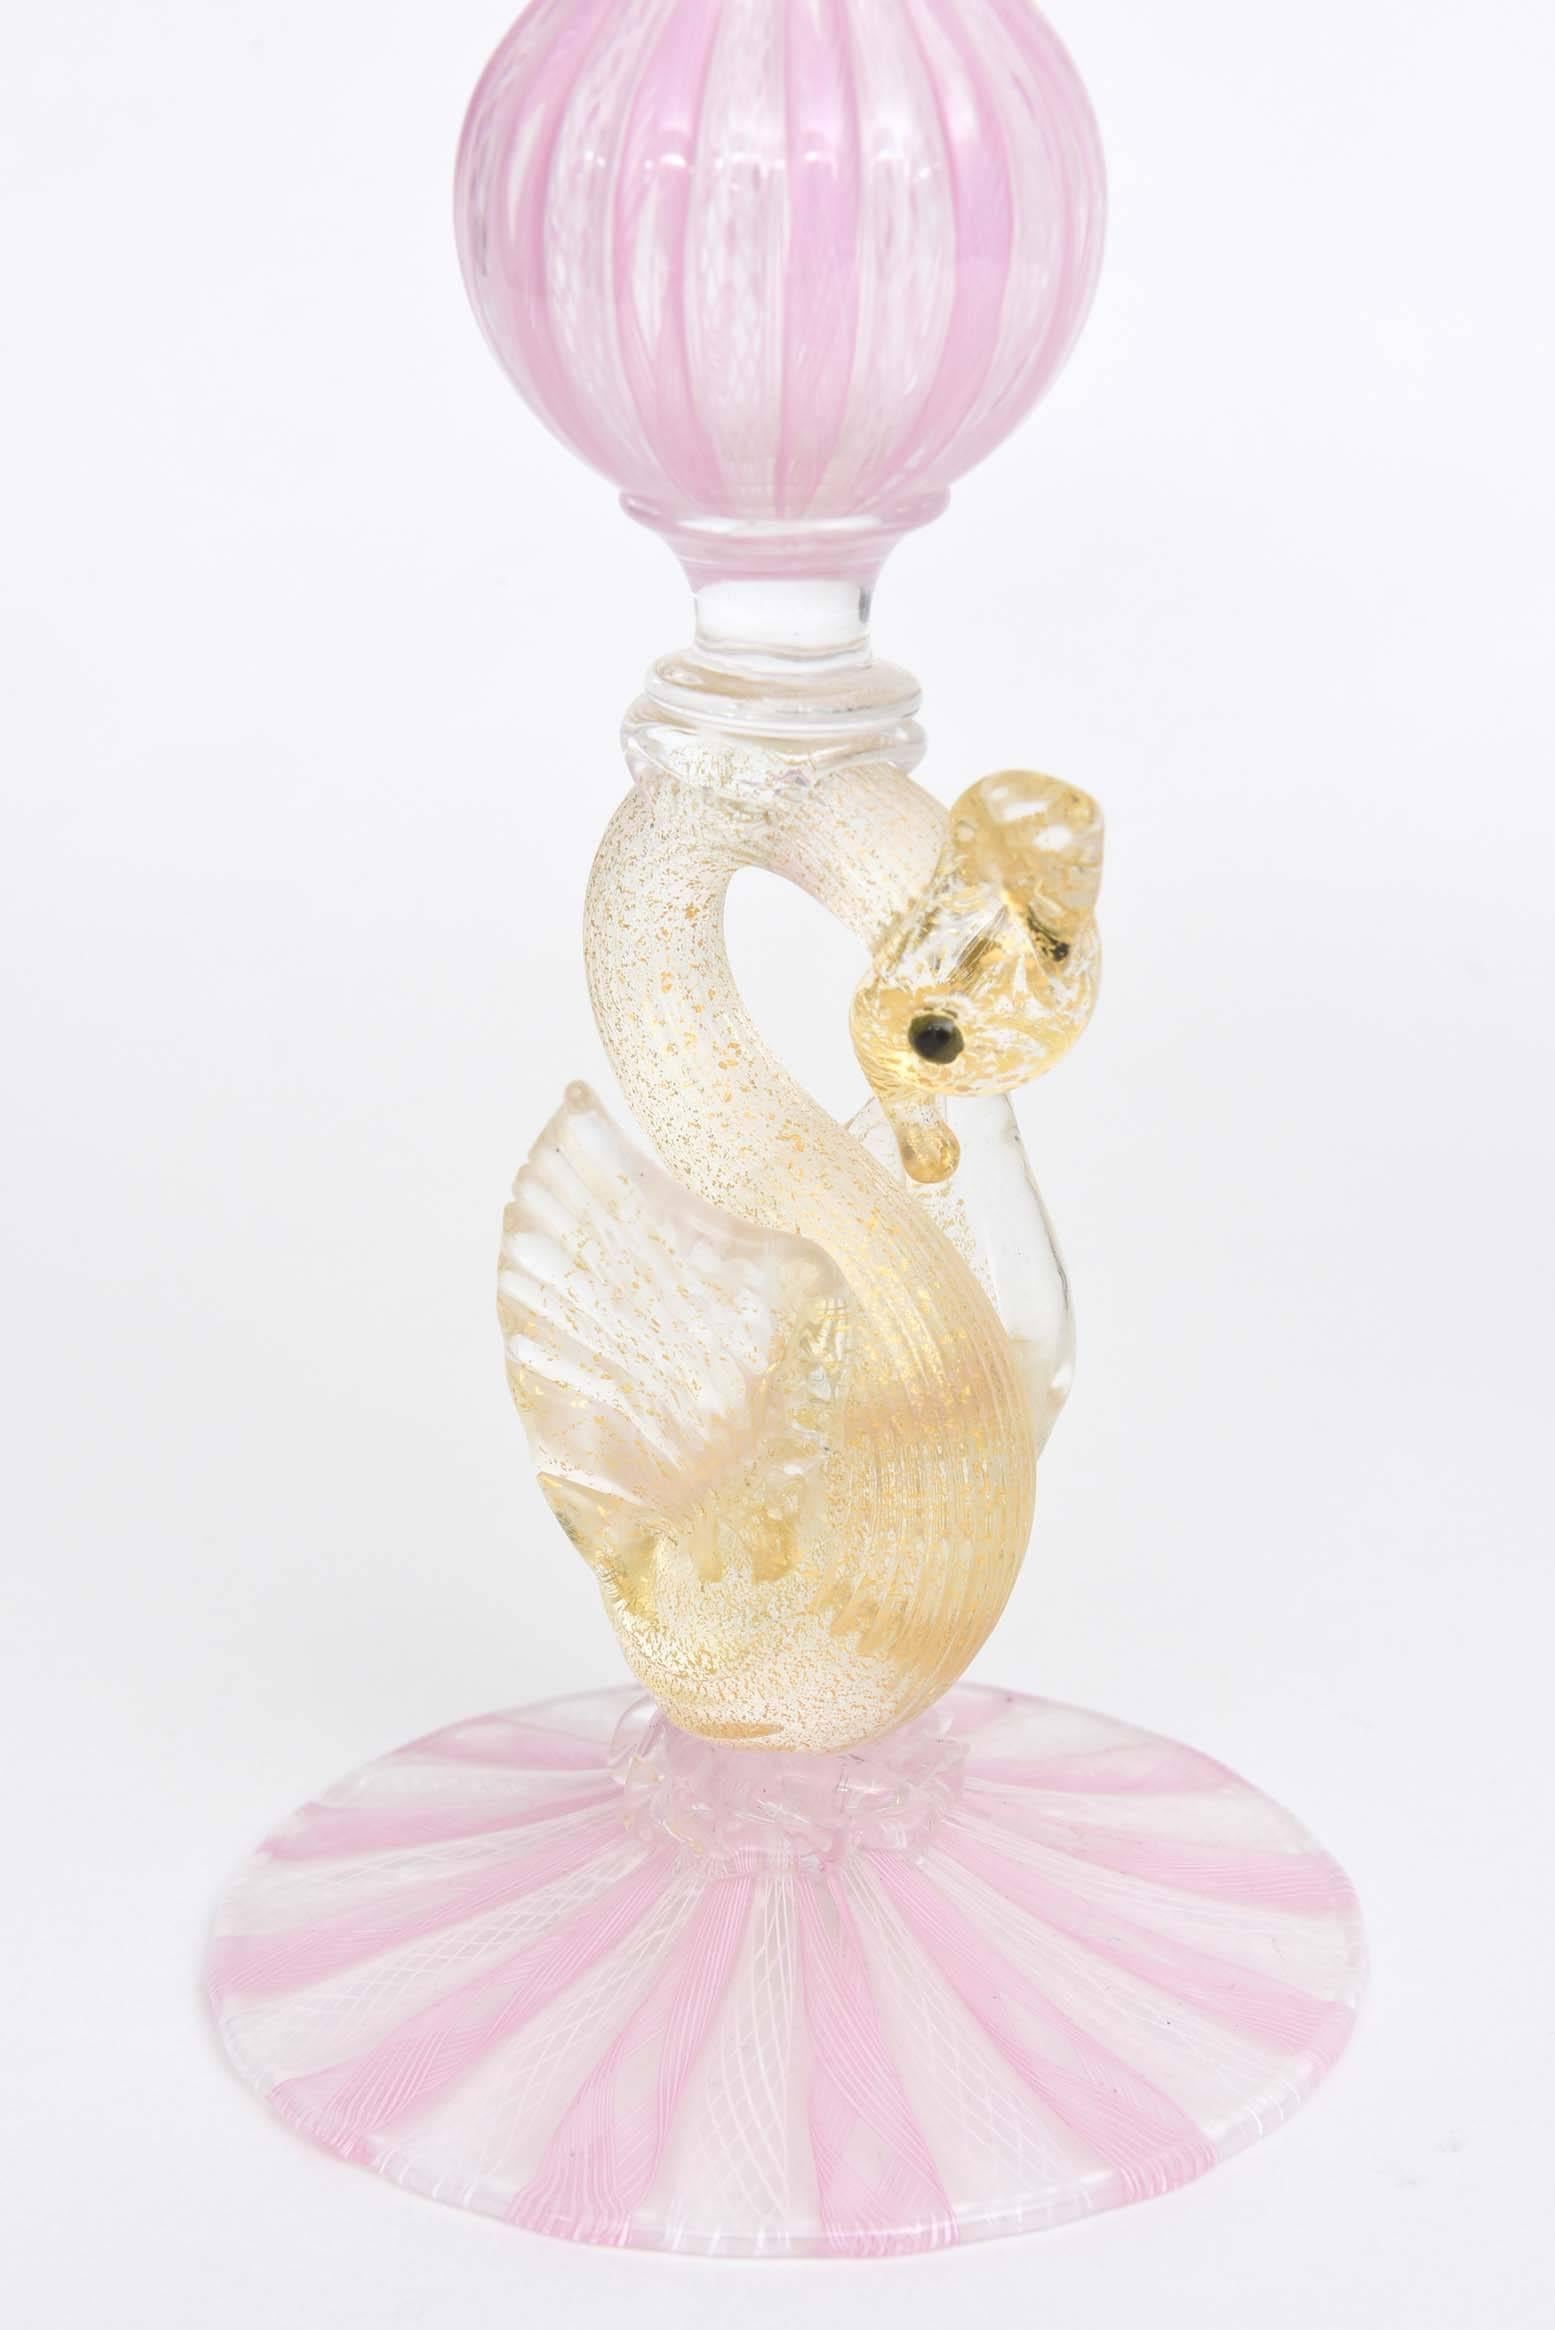 A delightful pair of pretty pink and white candlesticks or vases from the Isle of Murano. Nicely detailed and they have the traditional blown 24-karat gold infusion decorating the swans. Classic and elegant with or without candles or flowers.